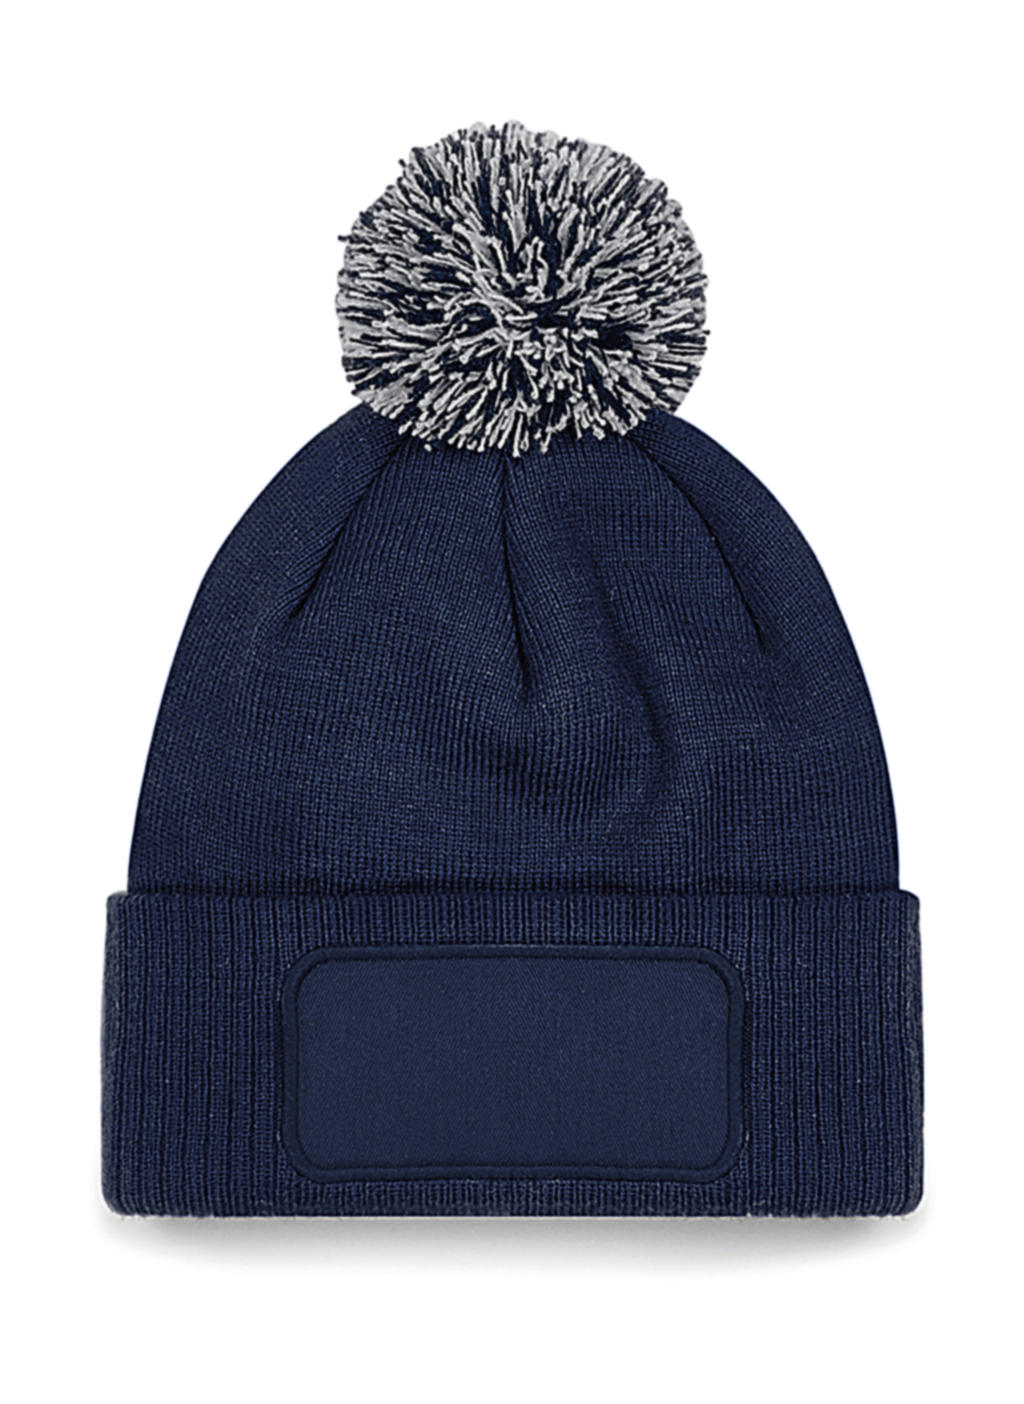  Snowstar Printers Beanie in Farbe French Navy/Light Grey